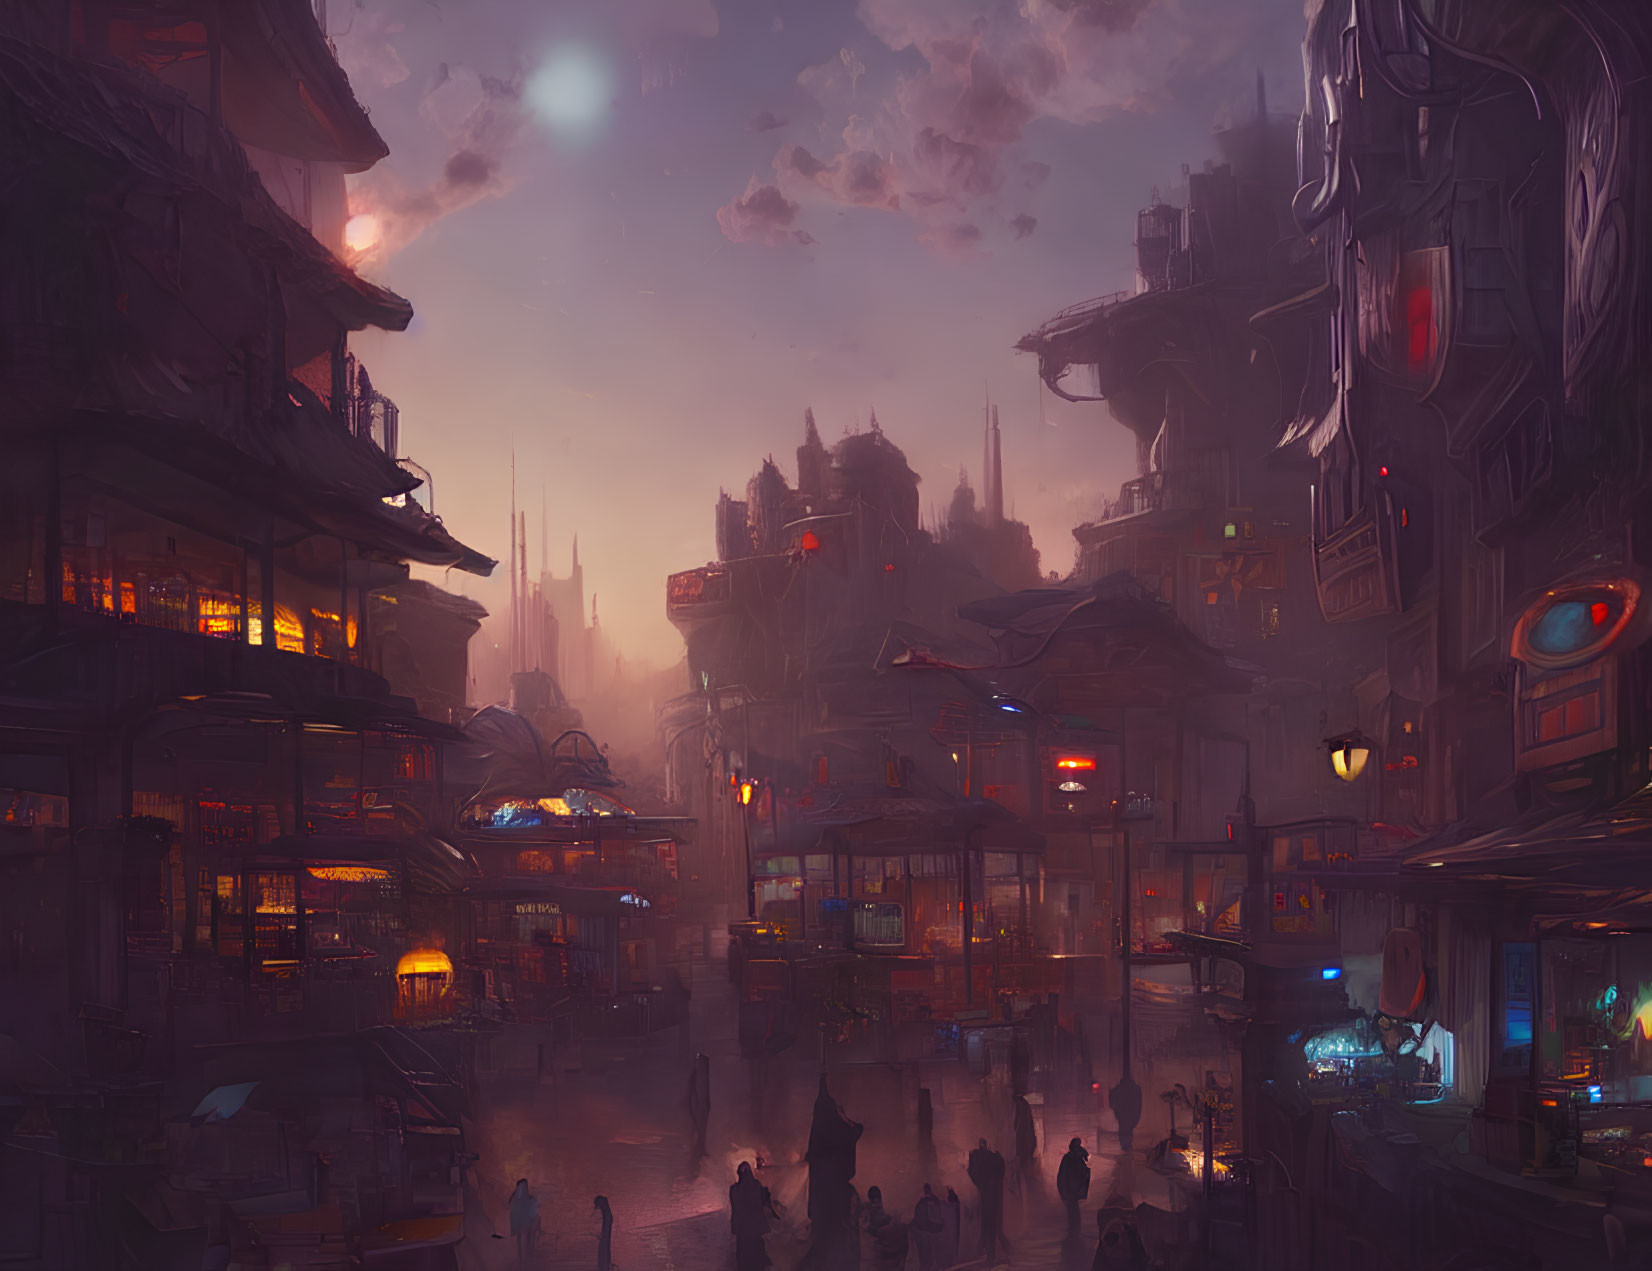 Futuristic cityscape at twilight: towering structures, neon signs, and silhouettes under a